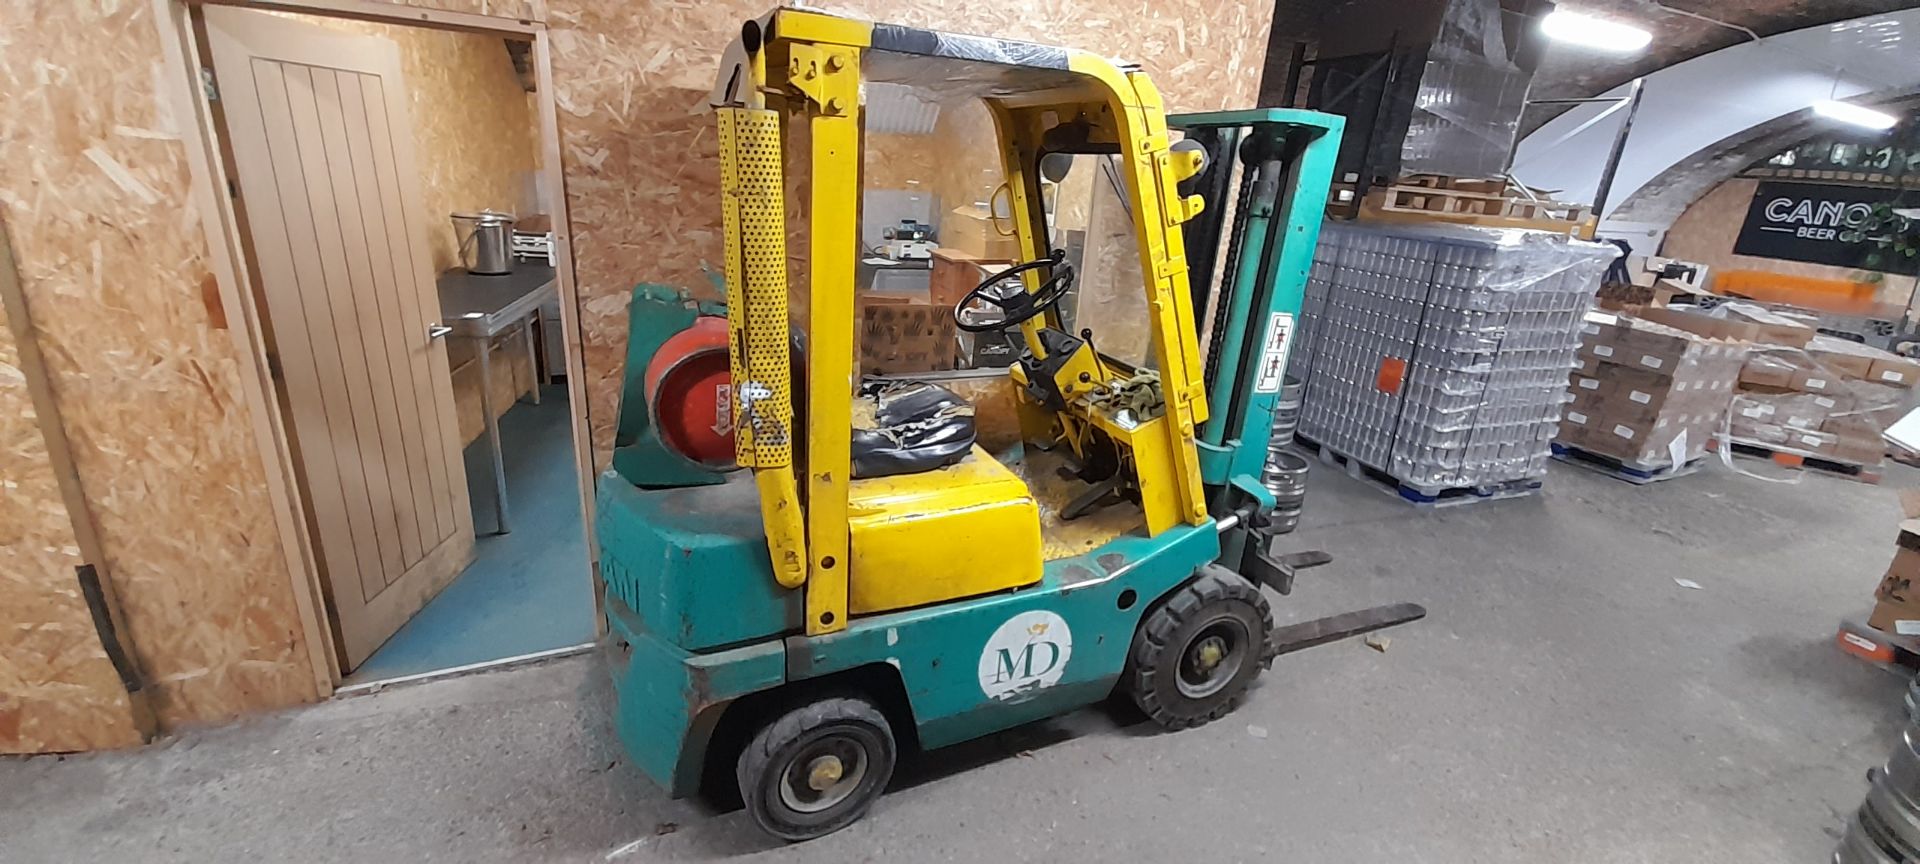 Nissan FO1A1811 LPG Forklift, Chassis 024398, 1166 Hours - Image 3 of 6